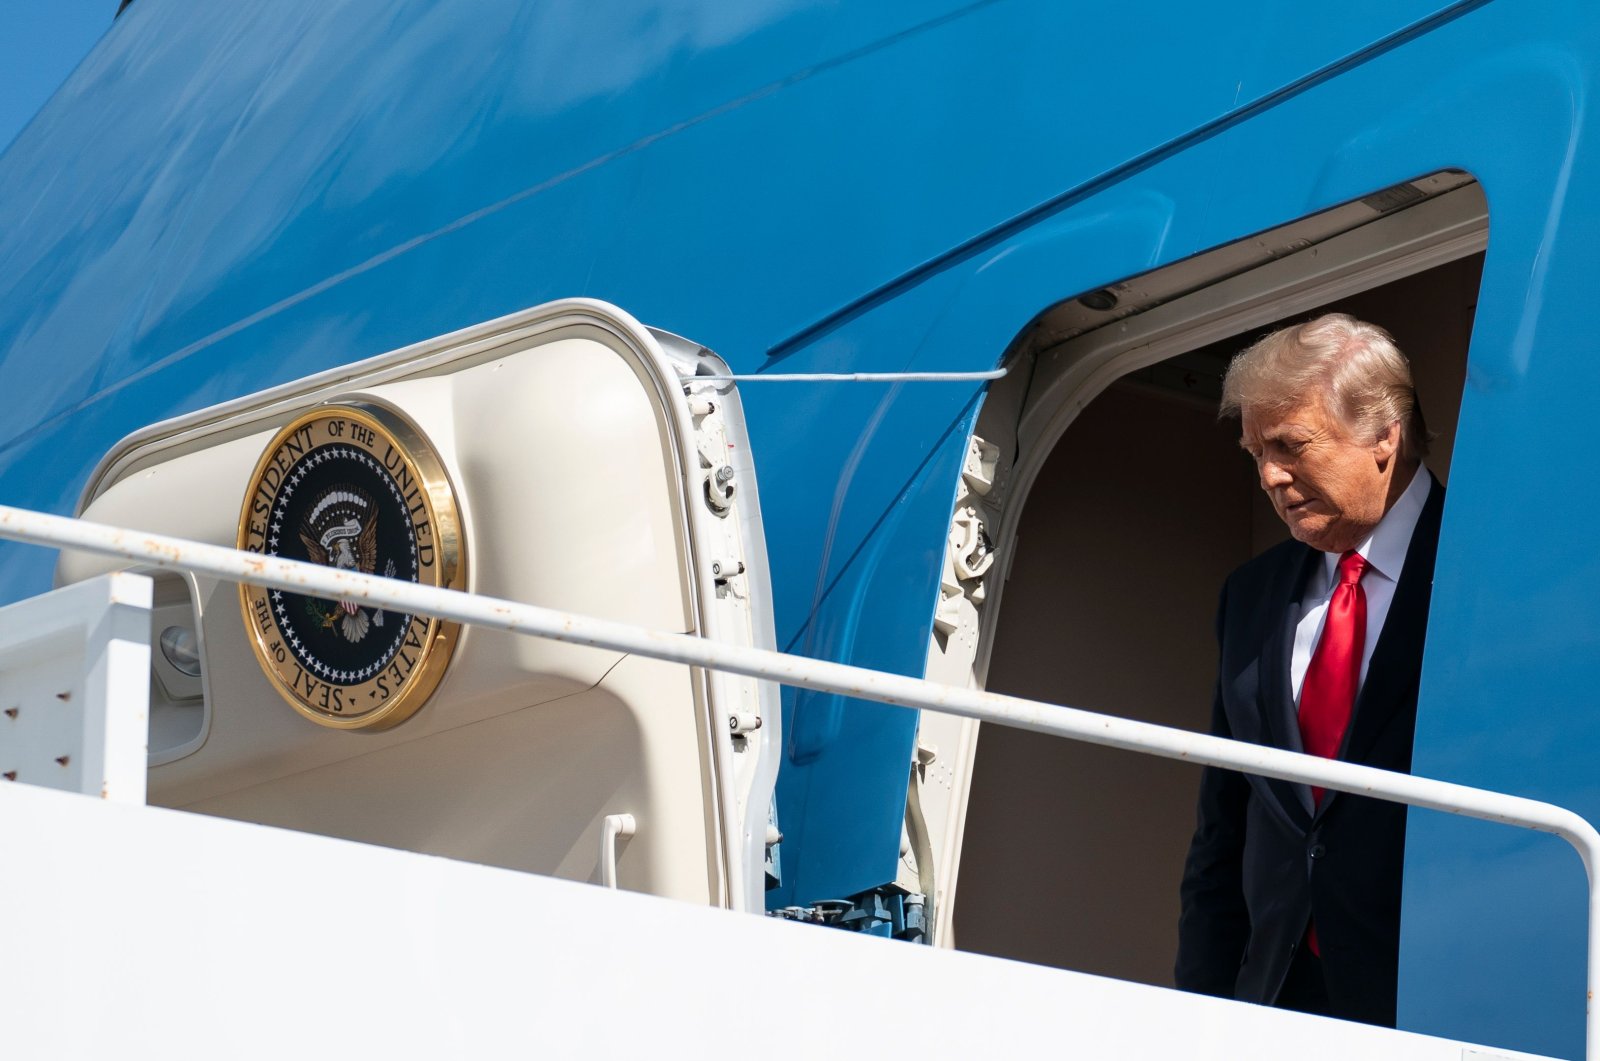 Outgoing U.S. President Donald Trump exits Air Force One after arriving at Palm Beach International Airport in West Palm Beach, Florida, U.S., Jan. 20, 2021. (AFP Photo)